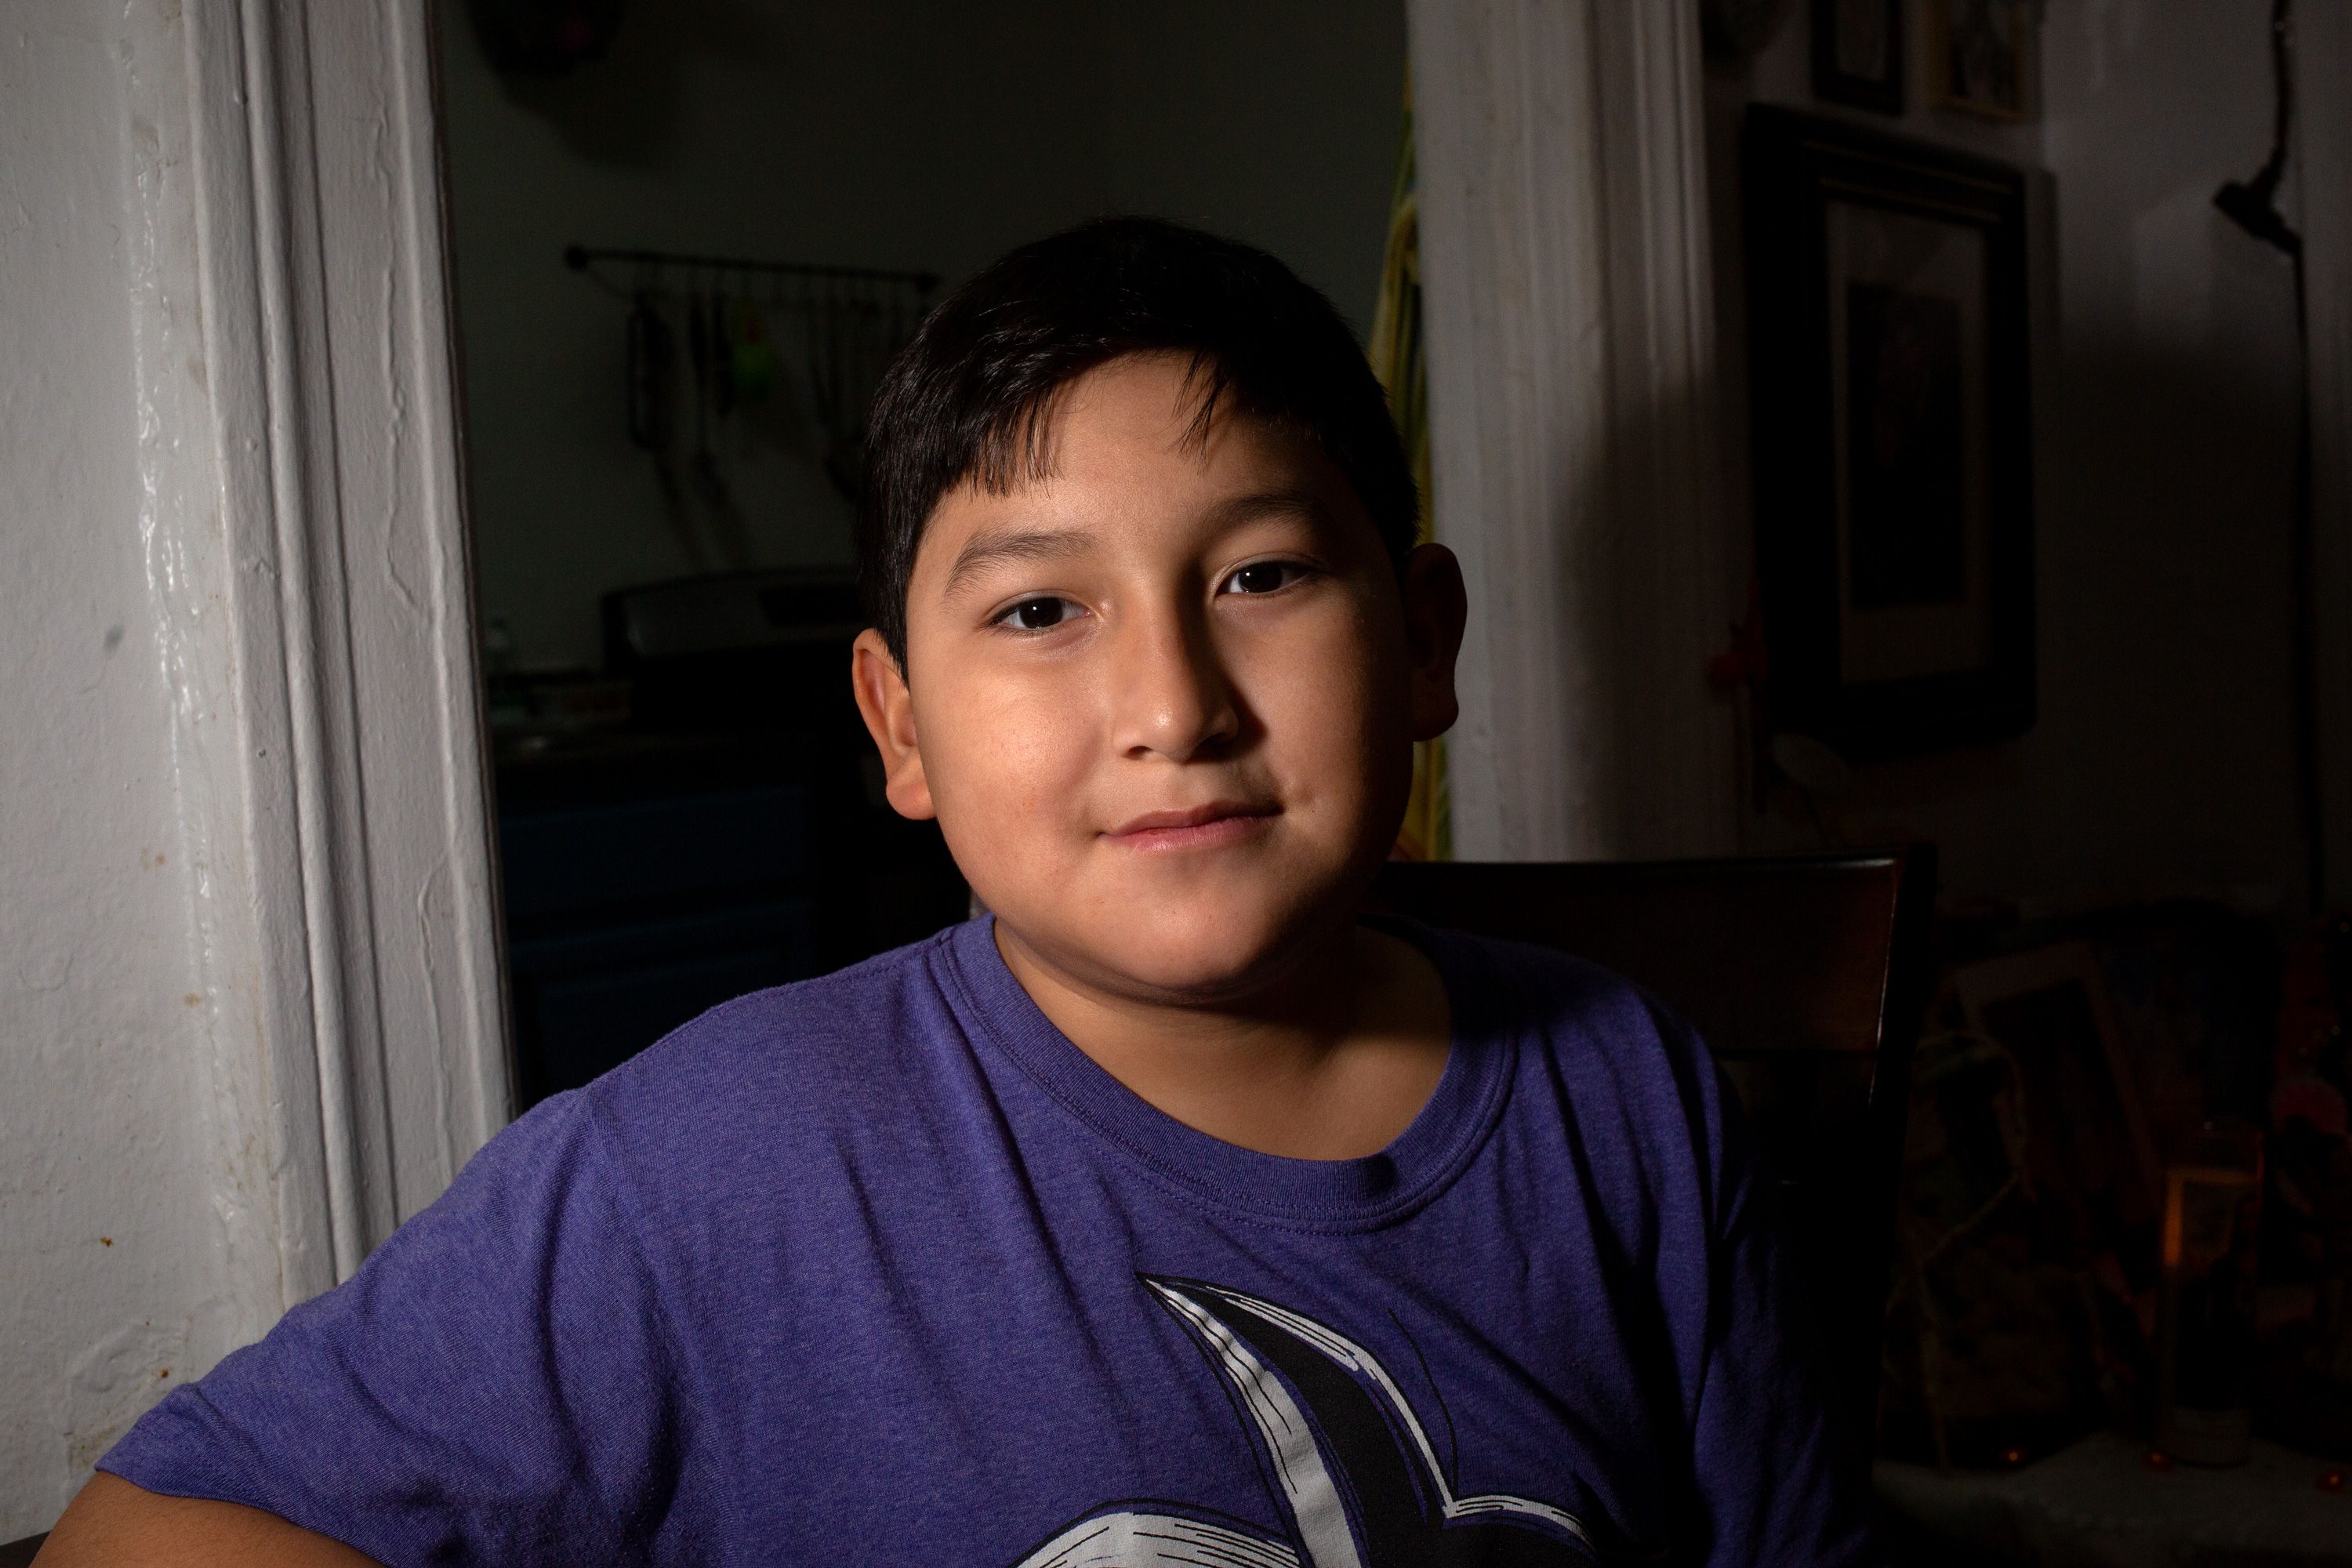 10-year-old Washington Heights resident Alejandro Amaya sits in the dining area of his late uncle’s Washington Heights apartment.